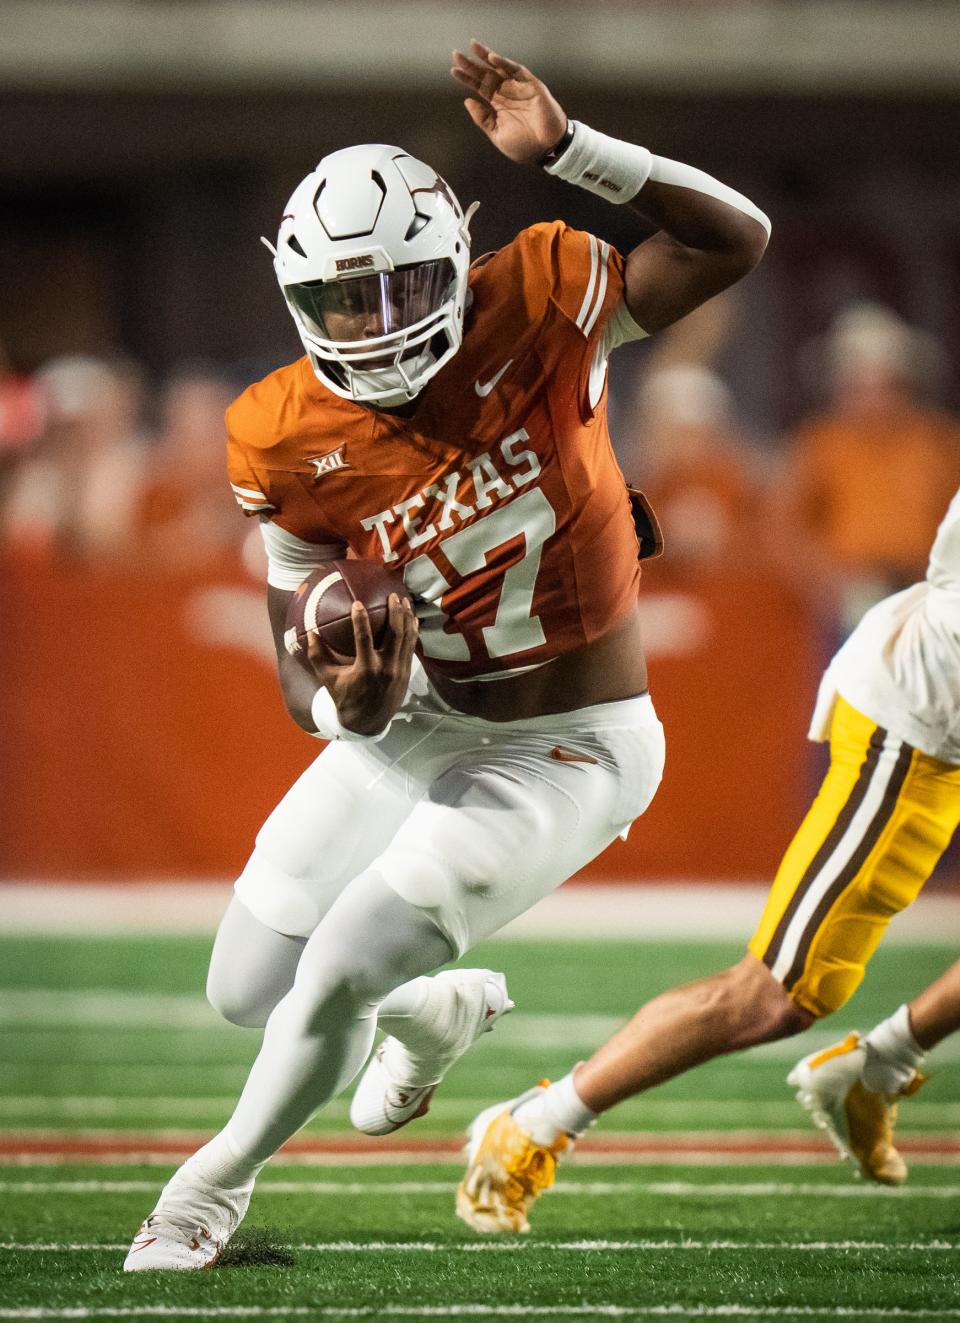 Texas running back Savion Red carries against Wyoming during the first quarter. He had two fourth-down conversions in the game out of the Wildcat formation and the Longhorns woke up from their three-quarter slumber to put the Cowboys away in the fourth, 31-10.